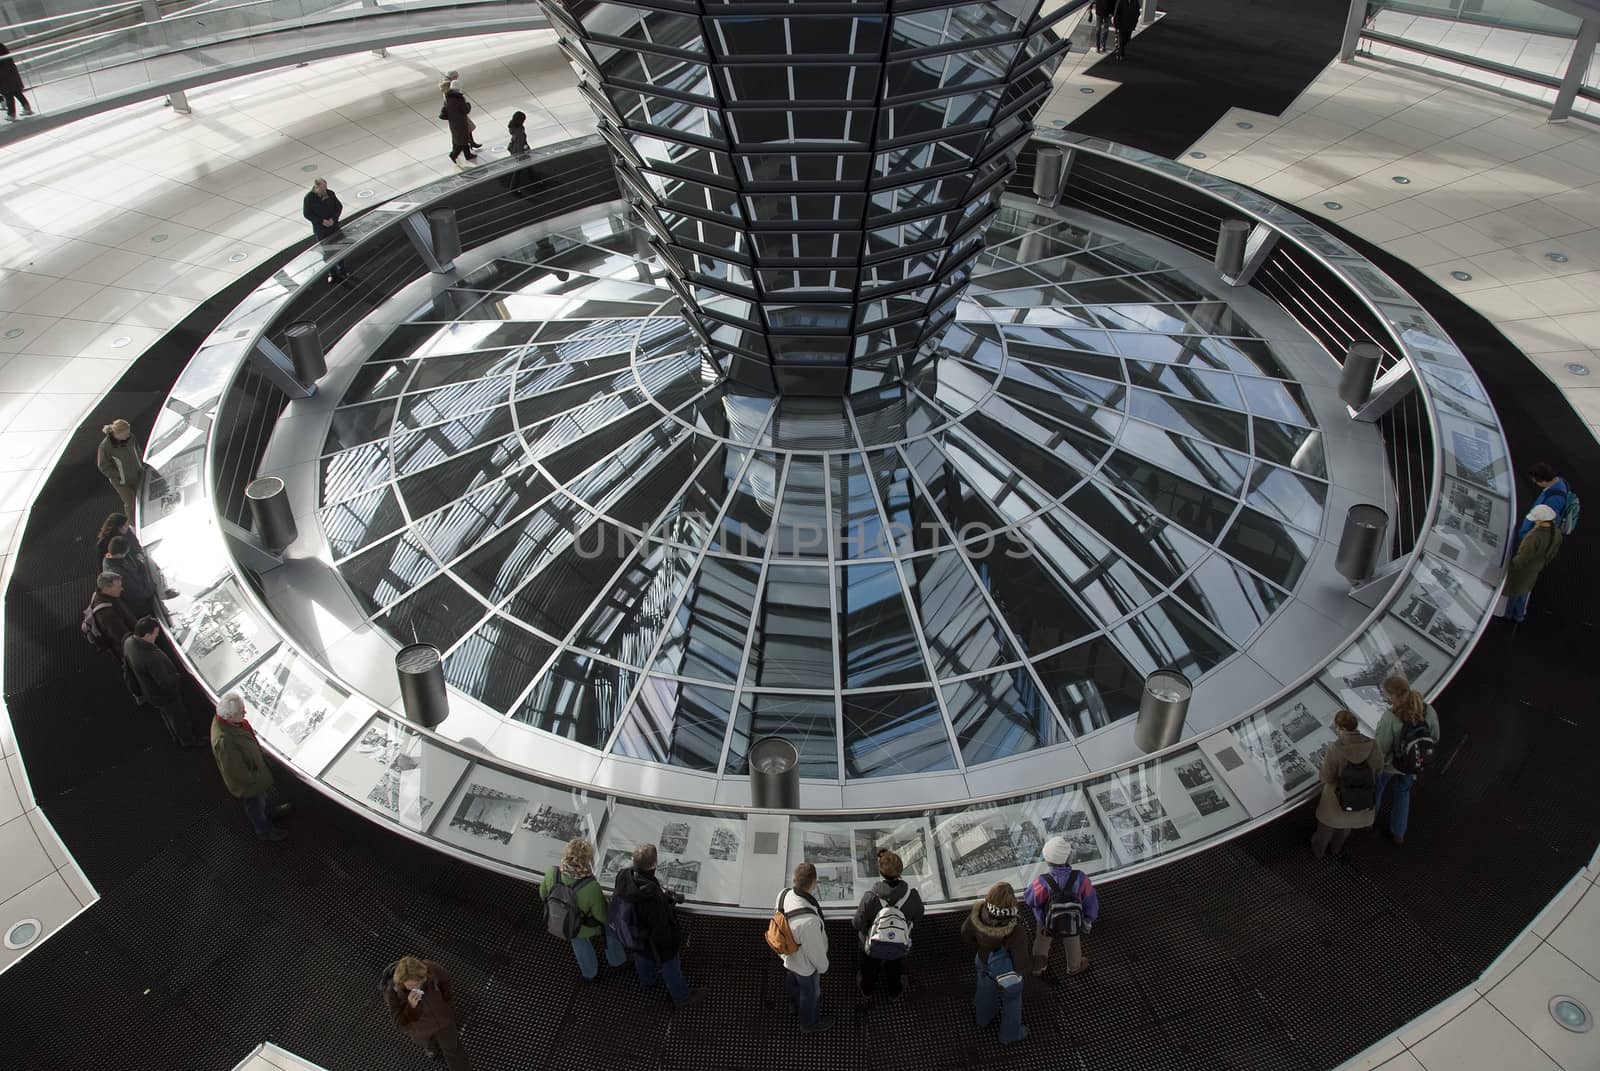 People in the Cupola on top of the Reichstag building in Berlin